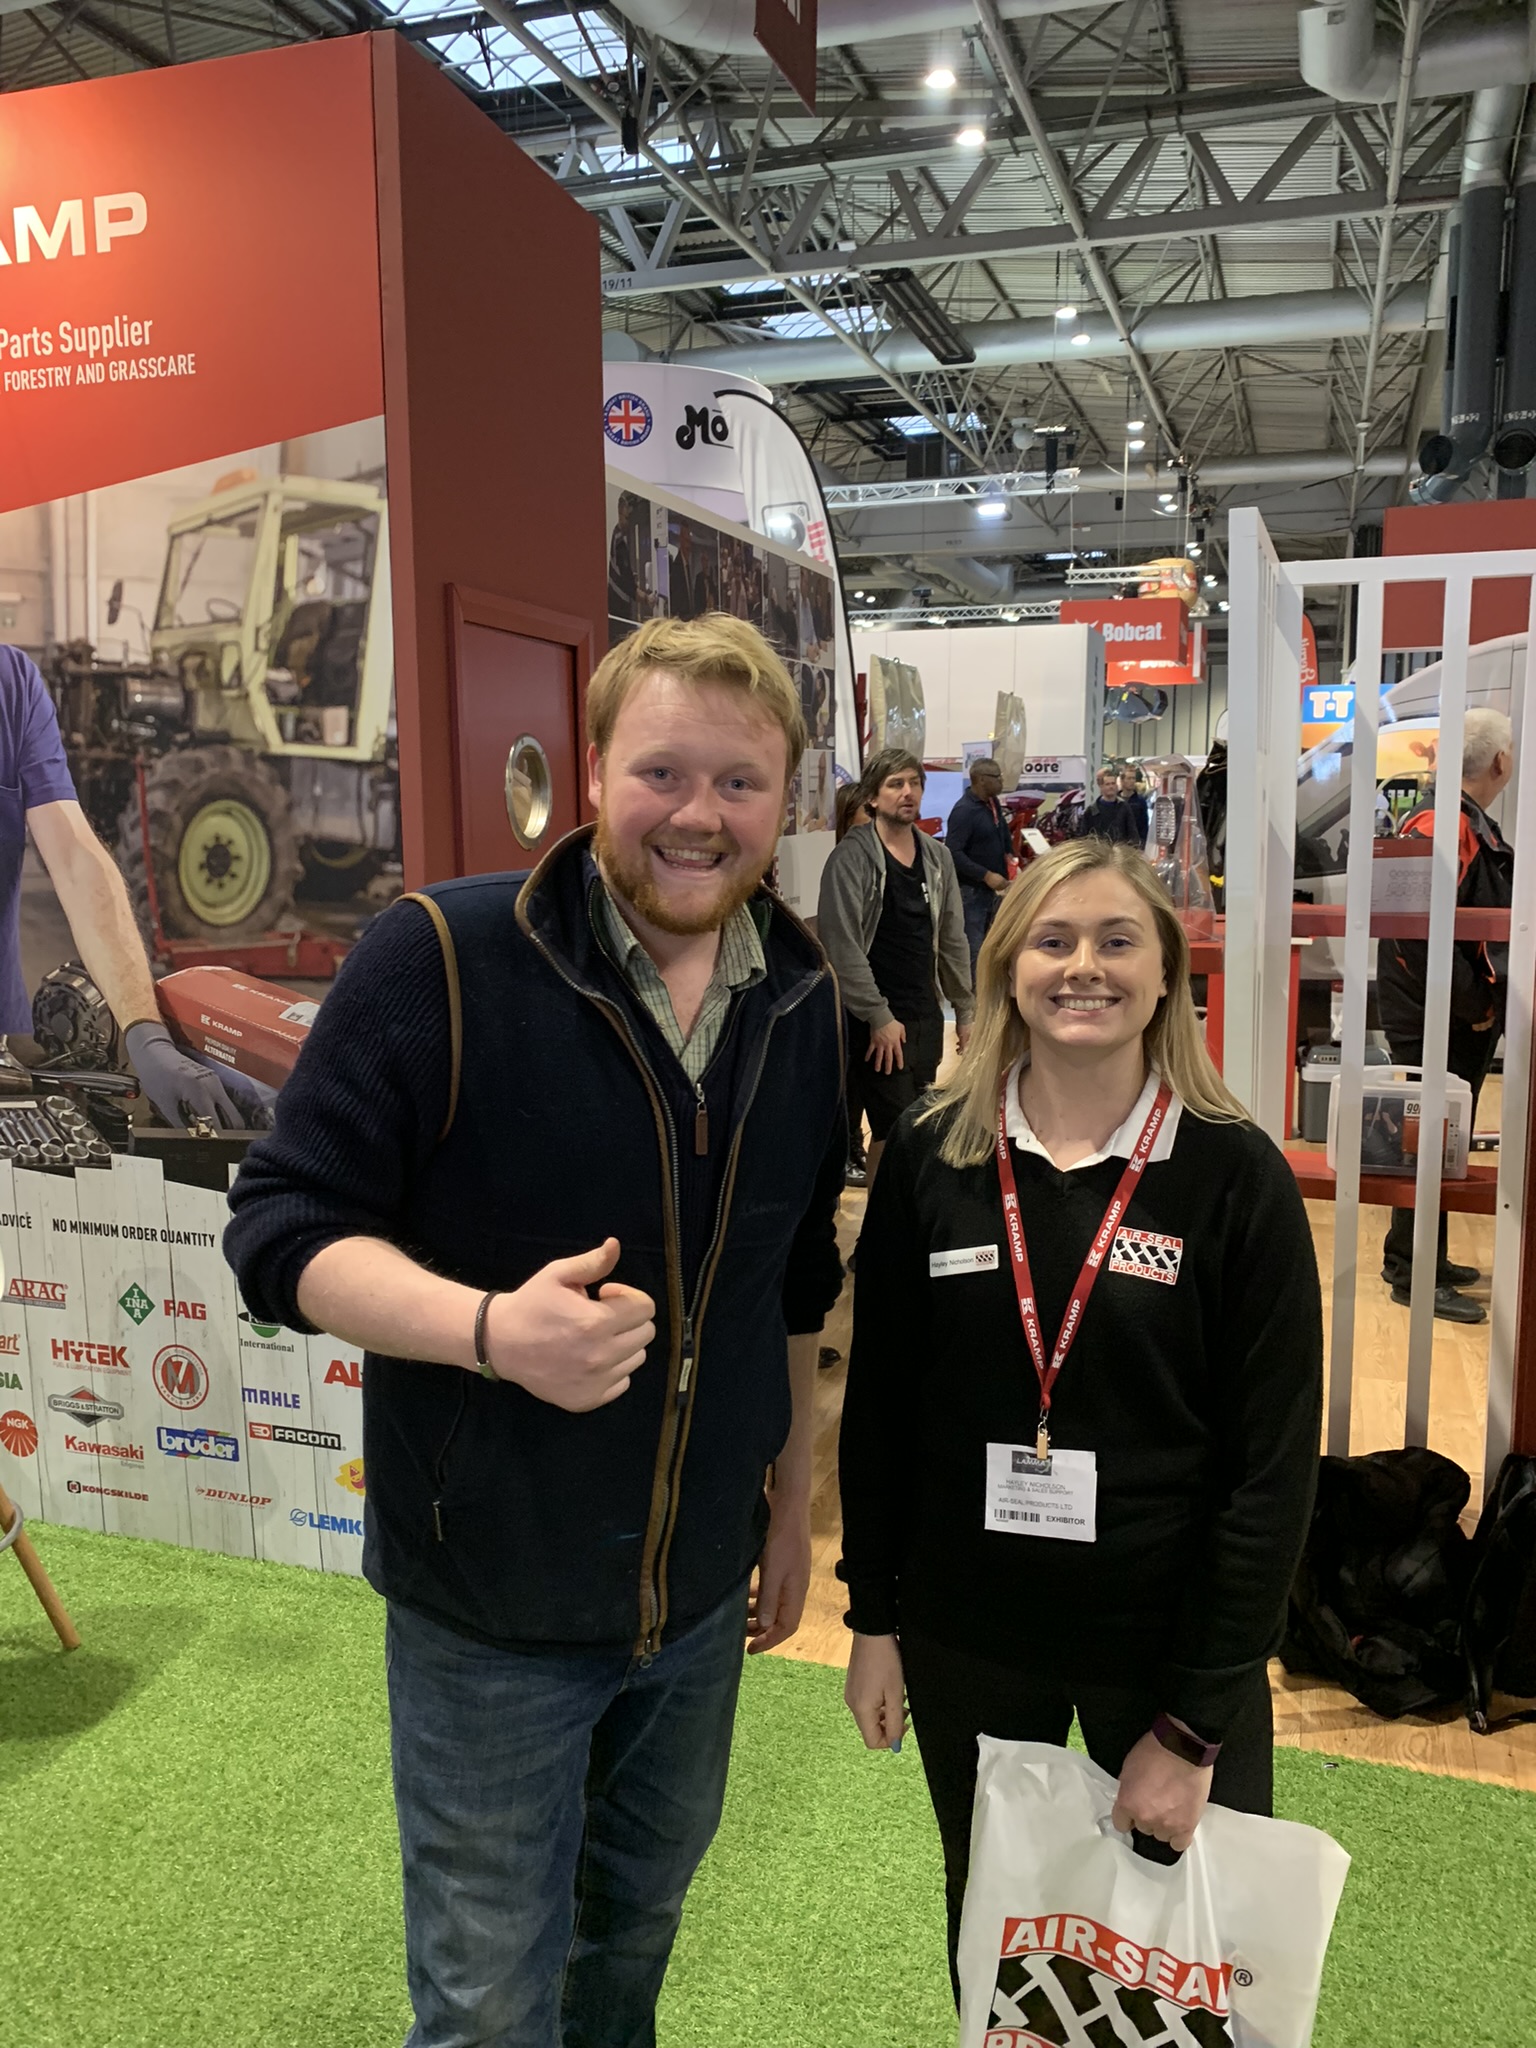 Air Seal Products Marketing Executive Hayley Nicholson Meets Kaleb Cooper from Clarksons Farm at Agricultural Exhibition LAMMA|Air-Seal Products brings in the crowds at LAMMA with their premier tyre sealant demonstration|15mm puncture being sealed by Air-Seal Products premier tyre sealant at LAMMA agricultural exhibition